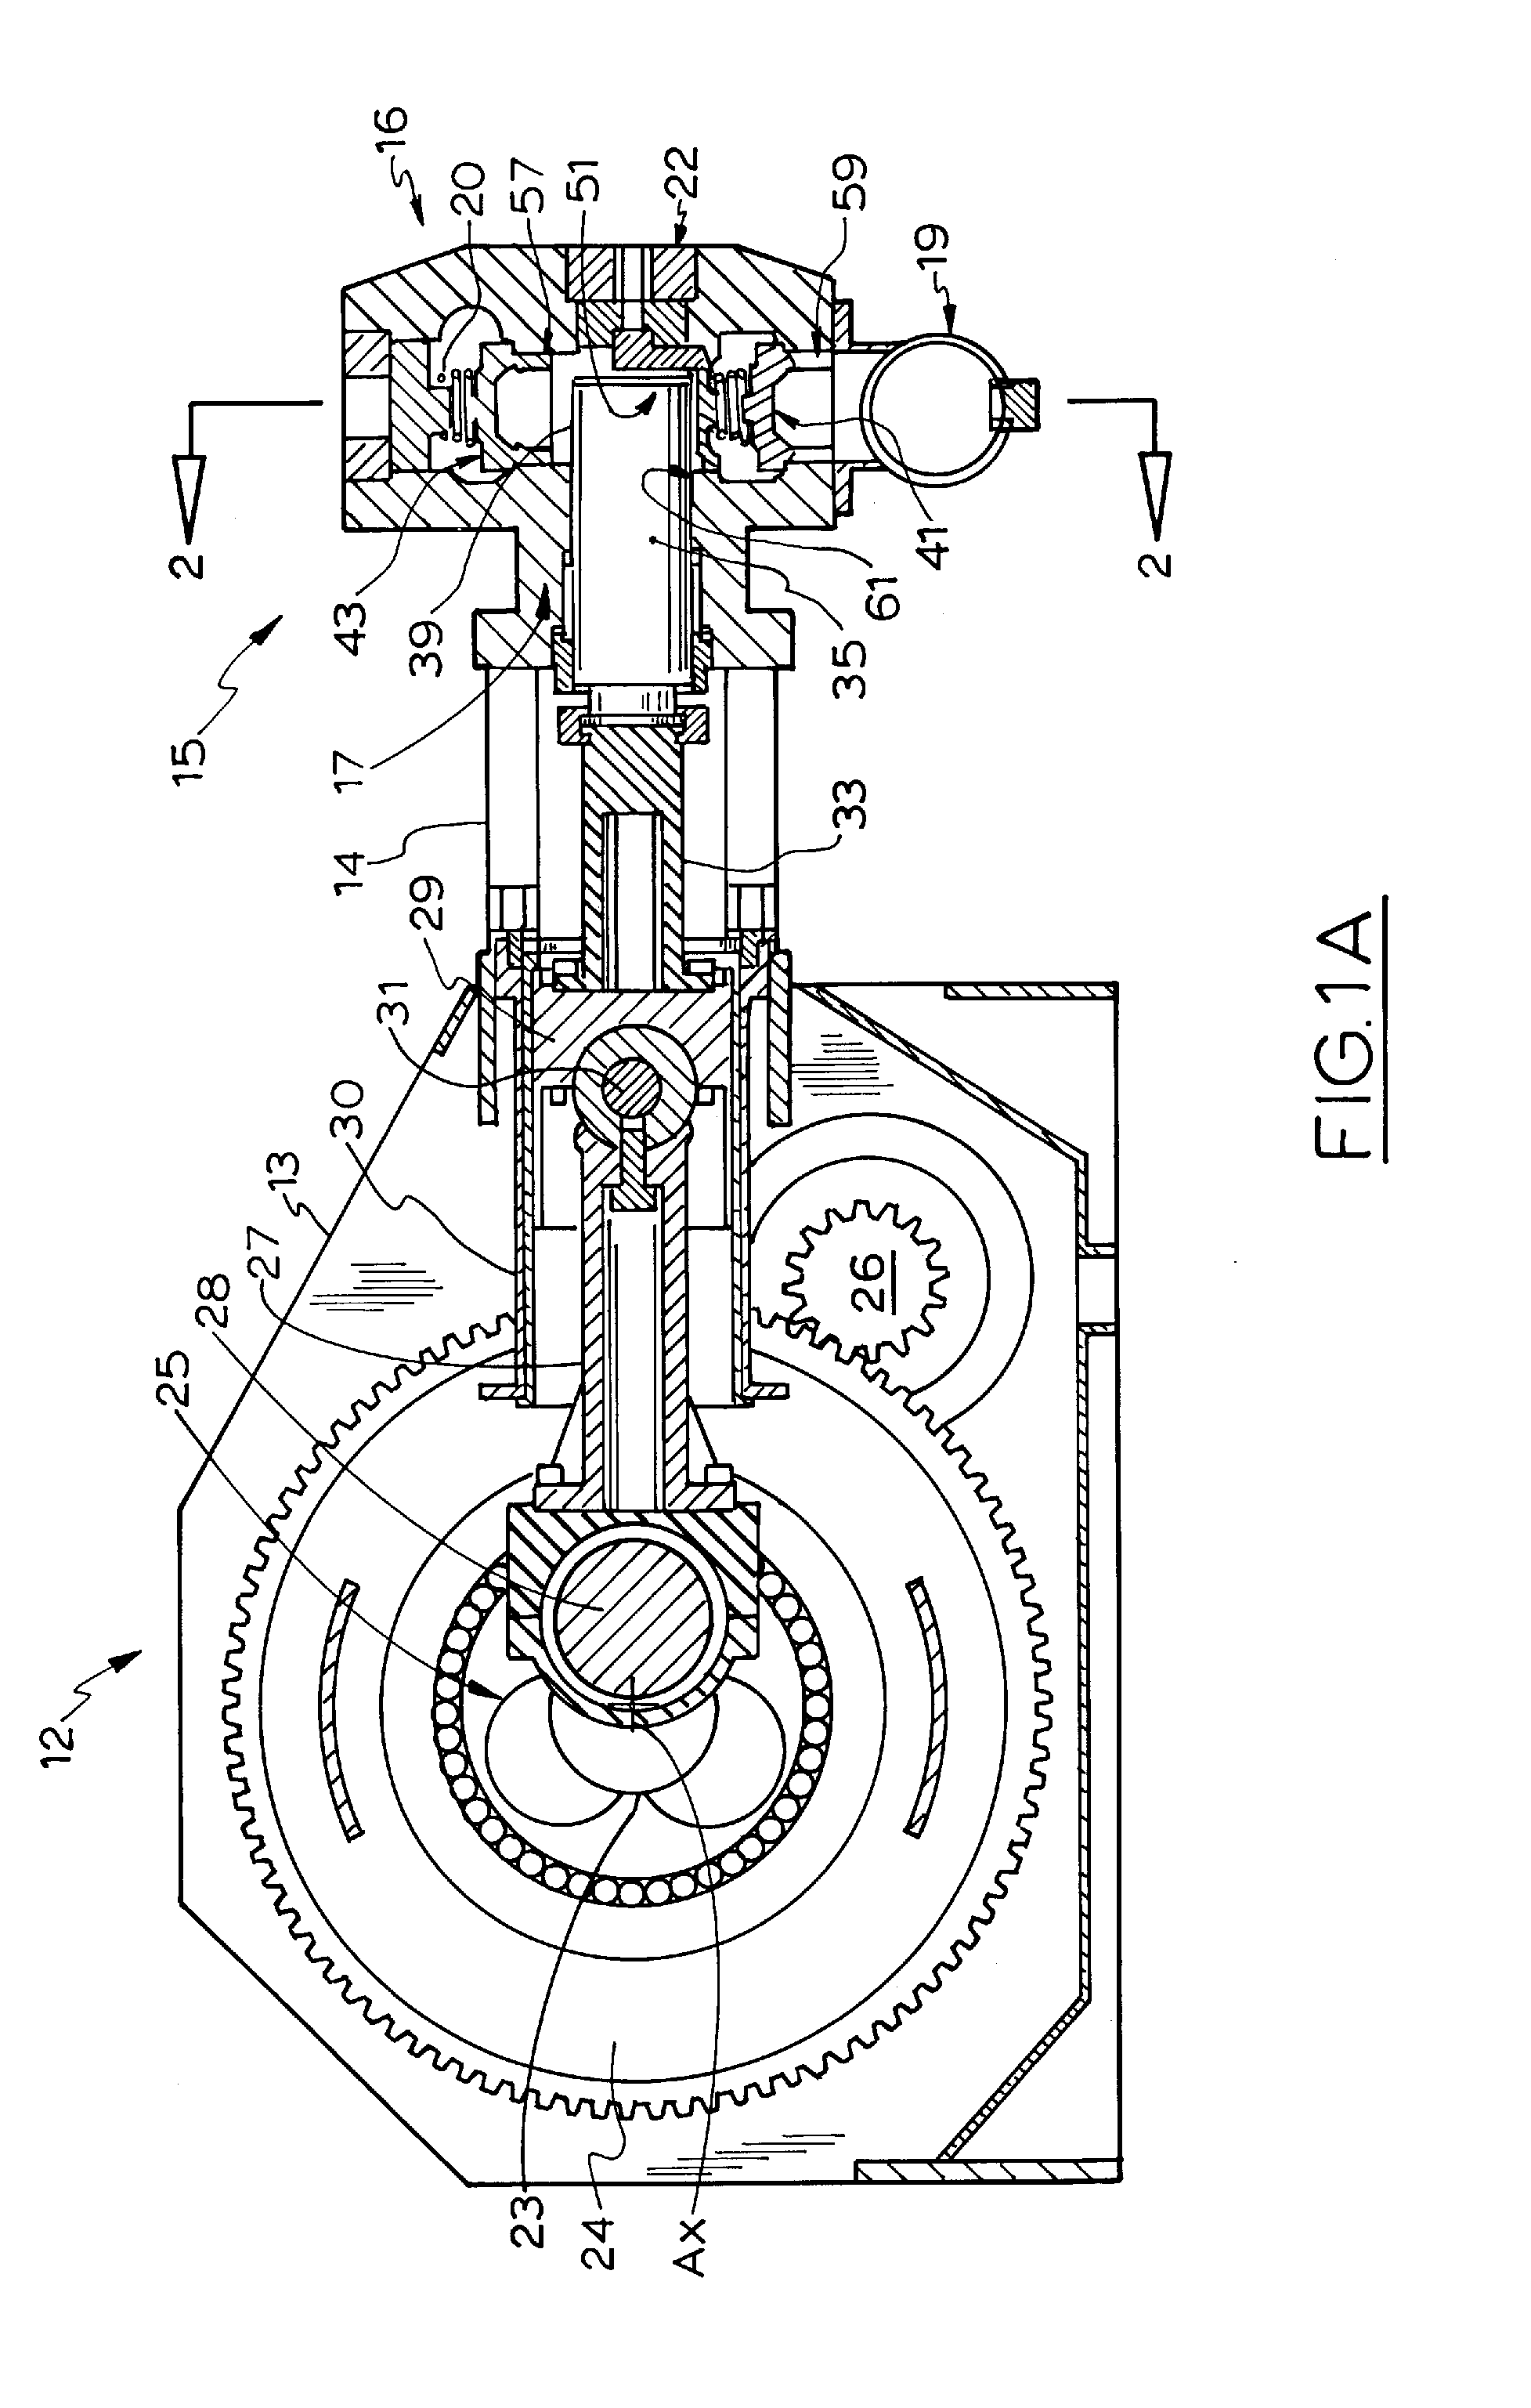 Offset valve bore in a reciprocating pump